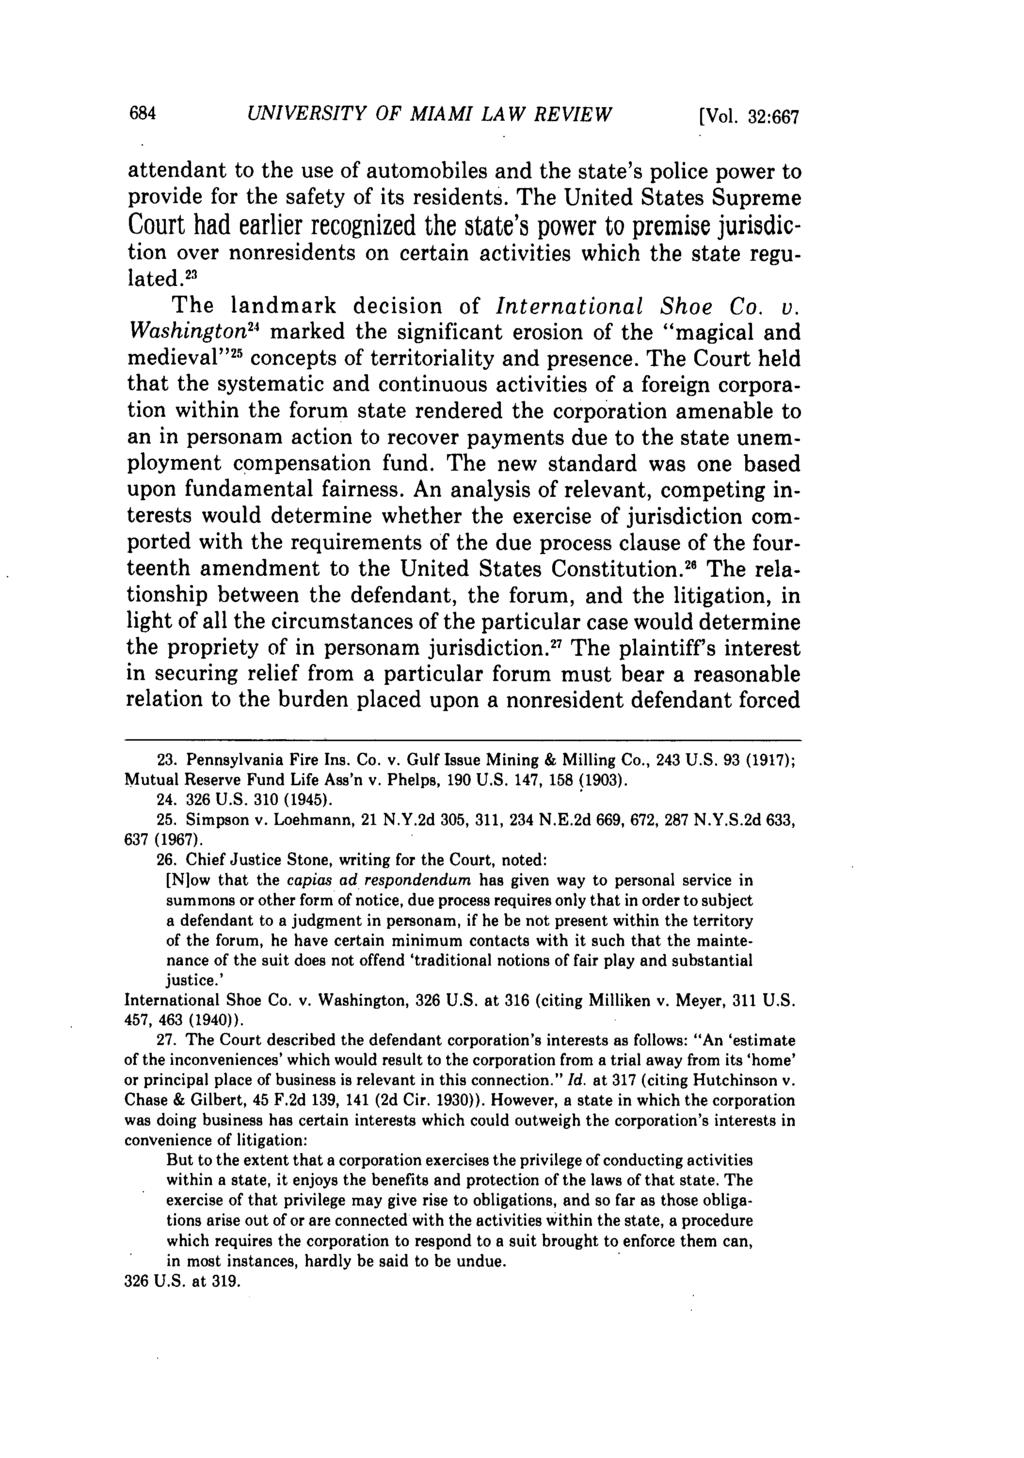 UNIVERSITY OF MIAMI LAW REVIEW [Vol. 32:667 attendant to the use of automobiles and the state's police power to provide for the safety of its residents.